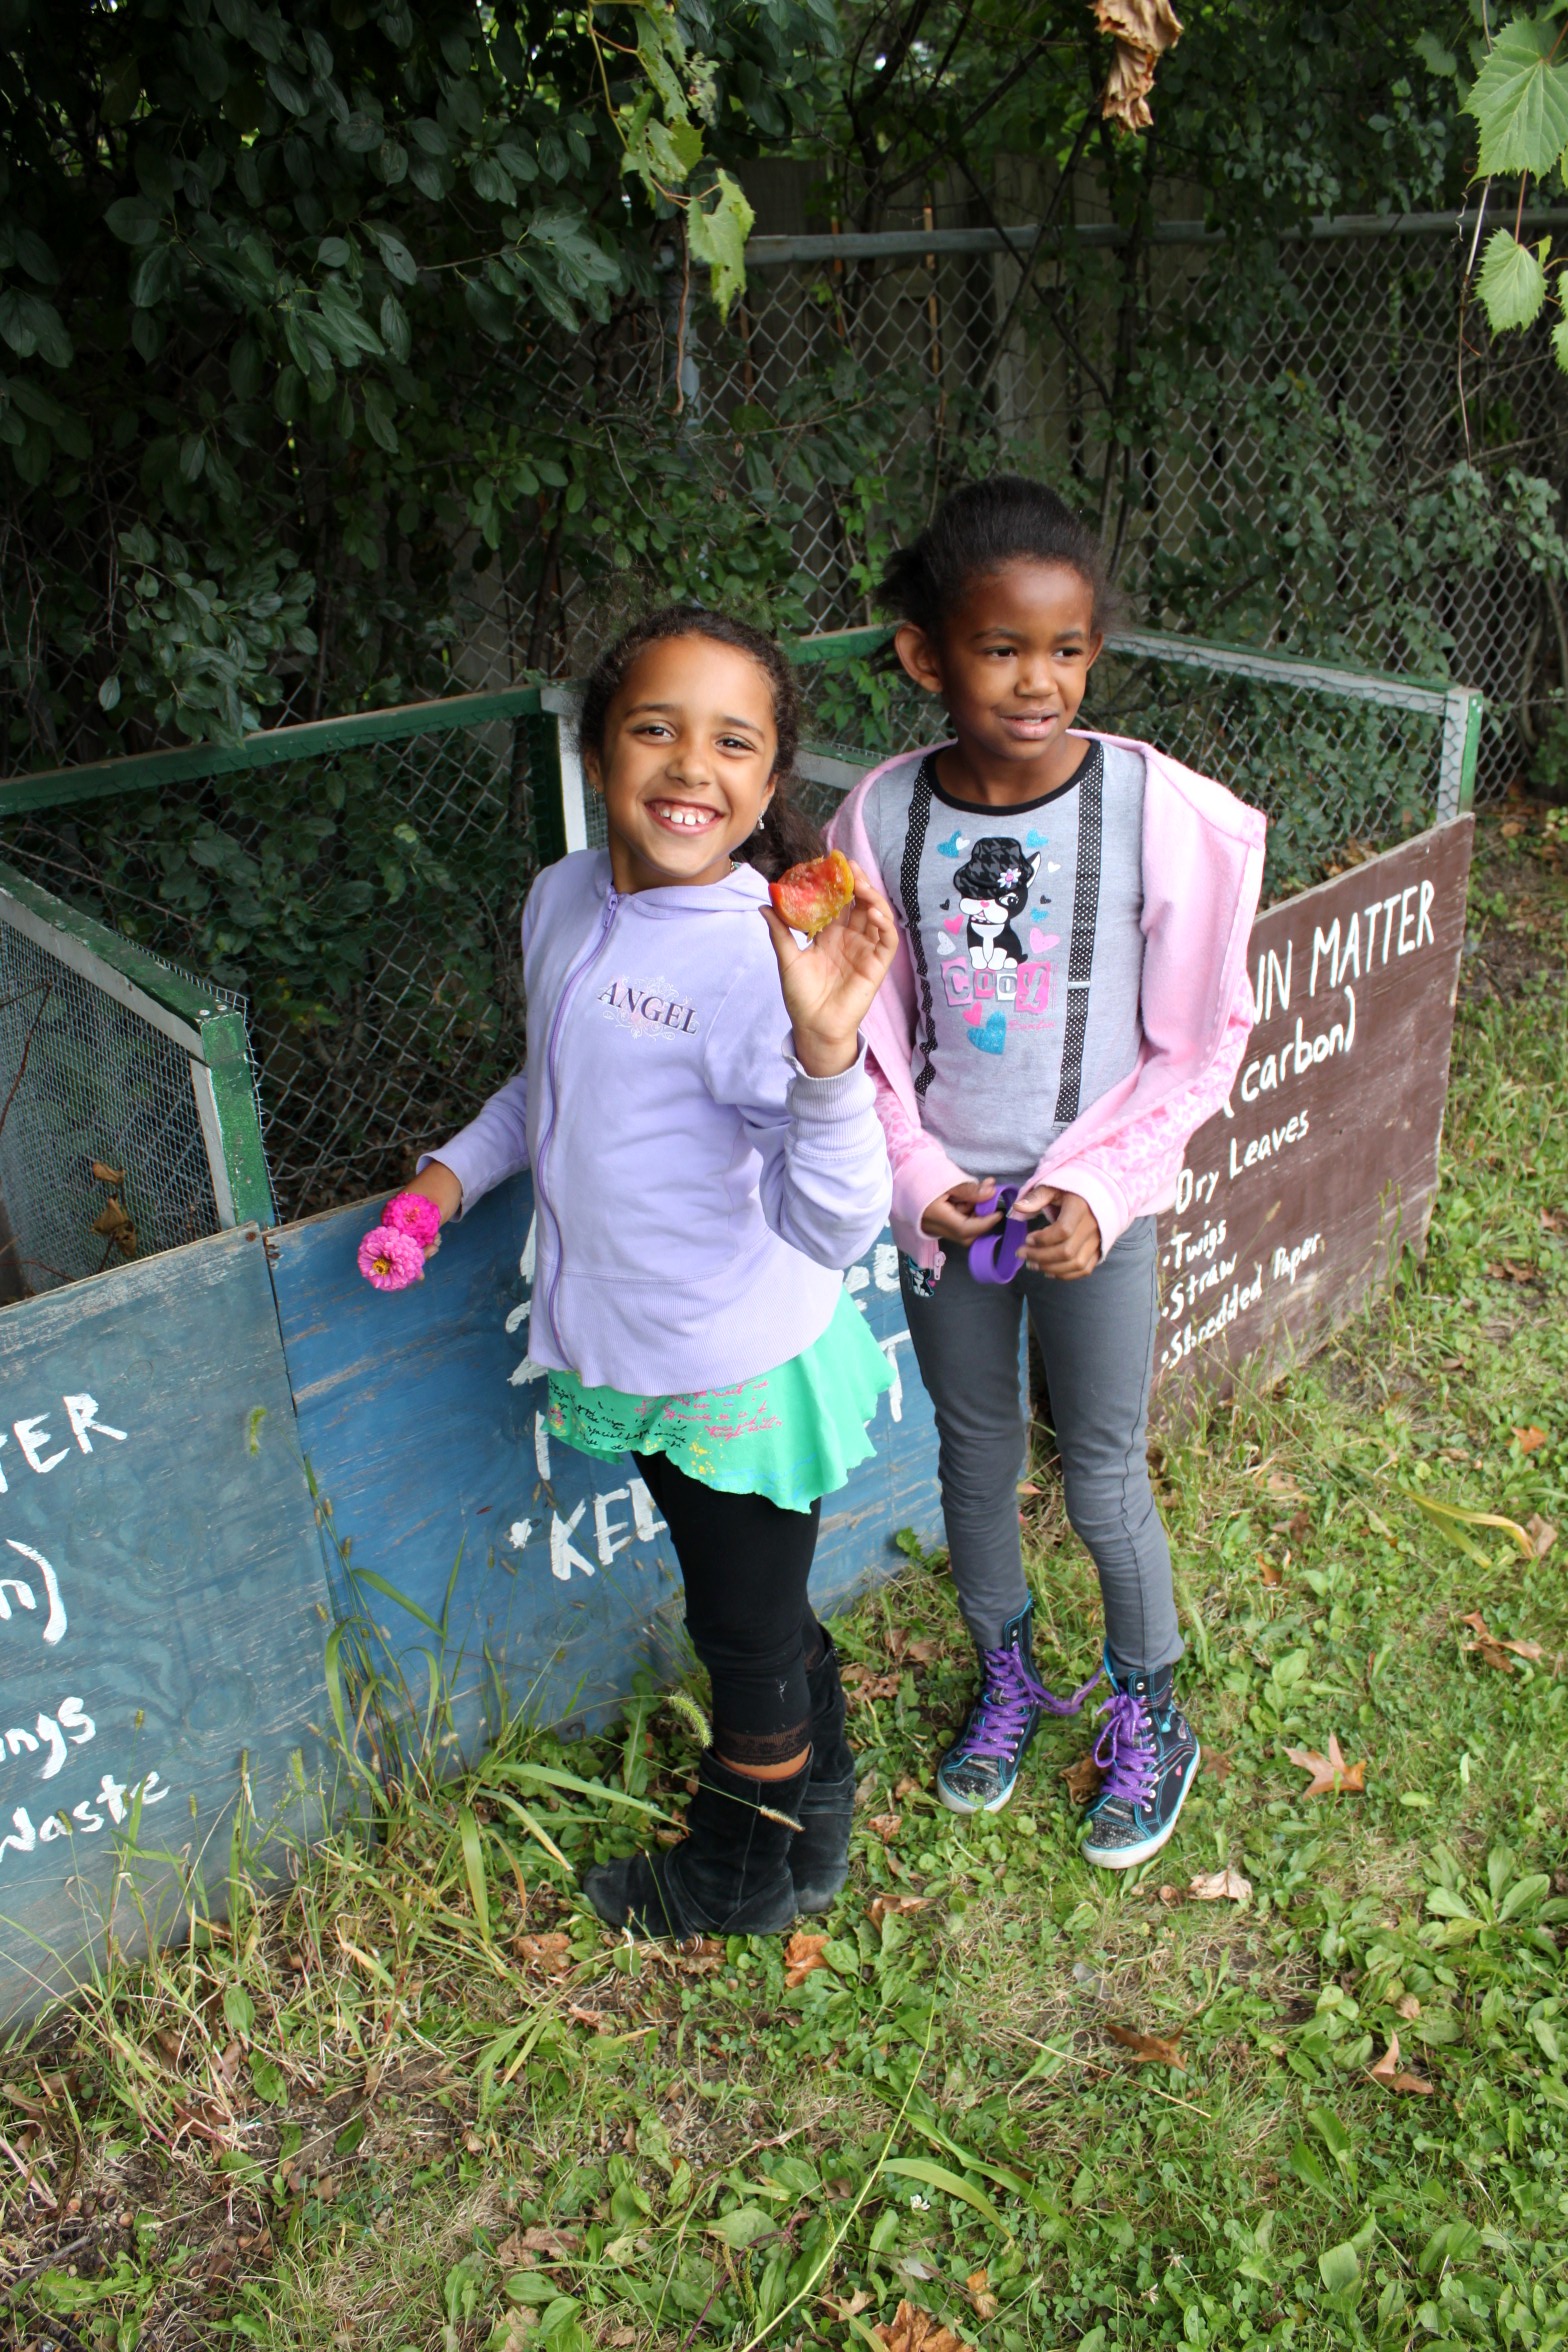 Composting at Prospect Learning Garden